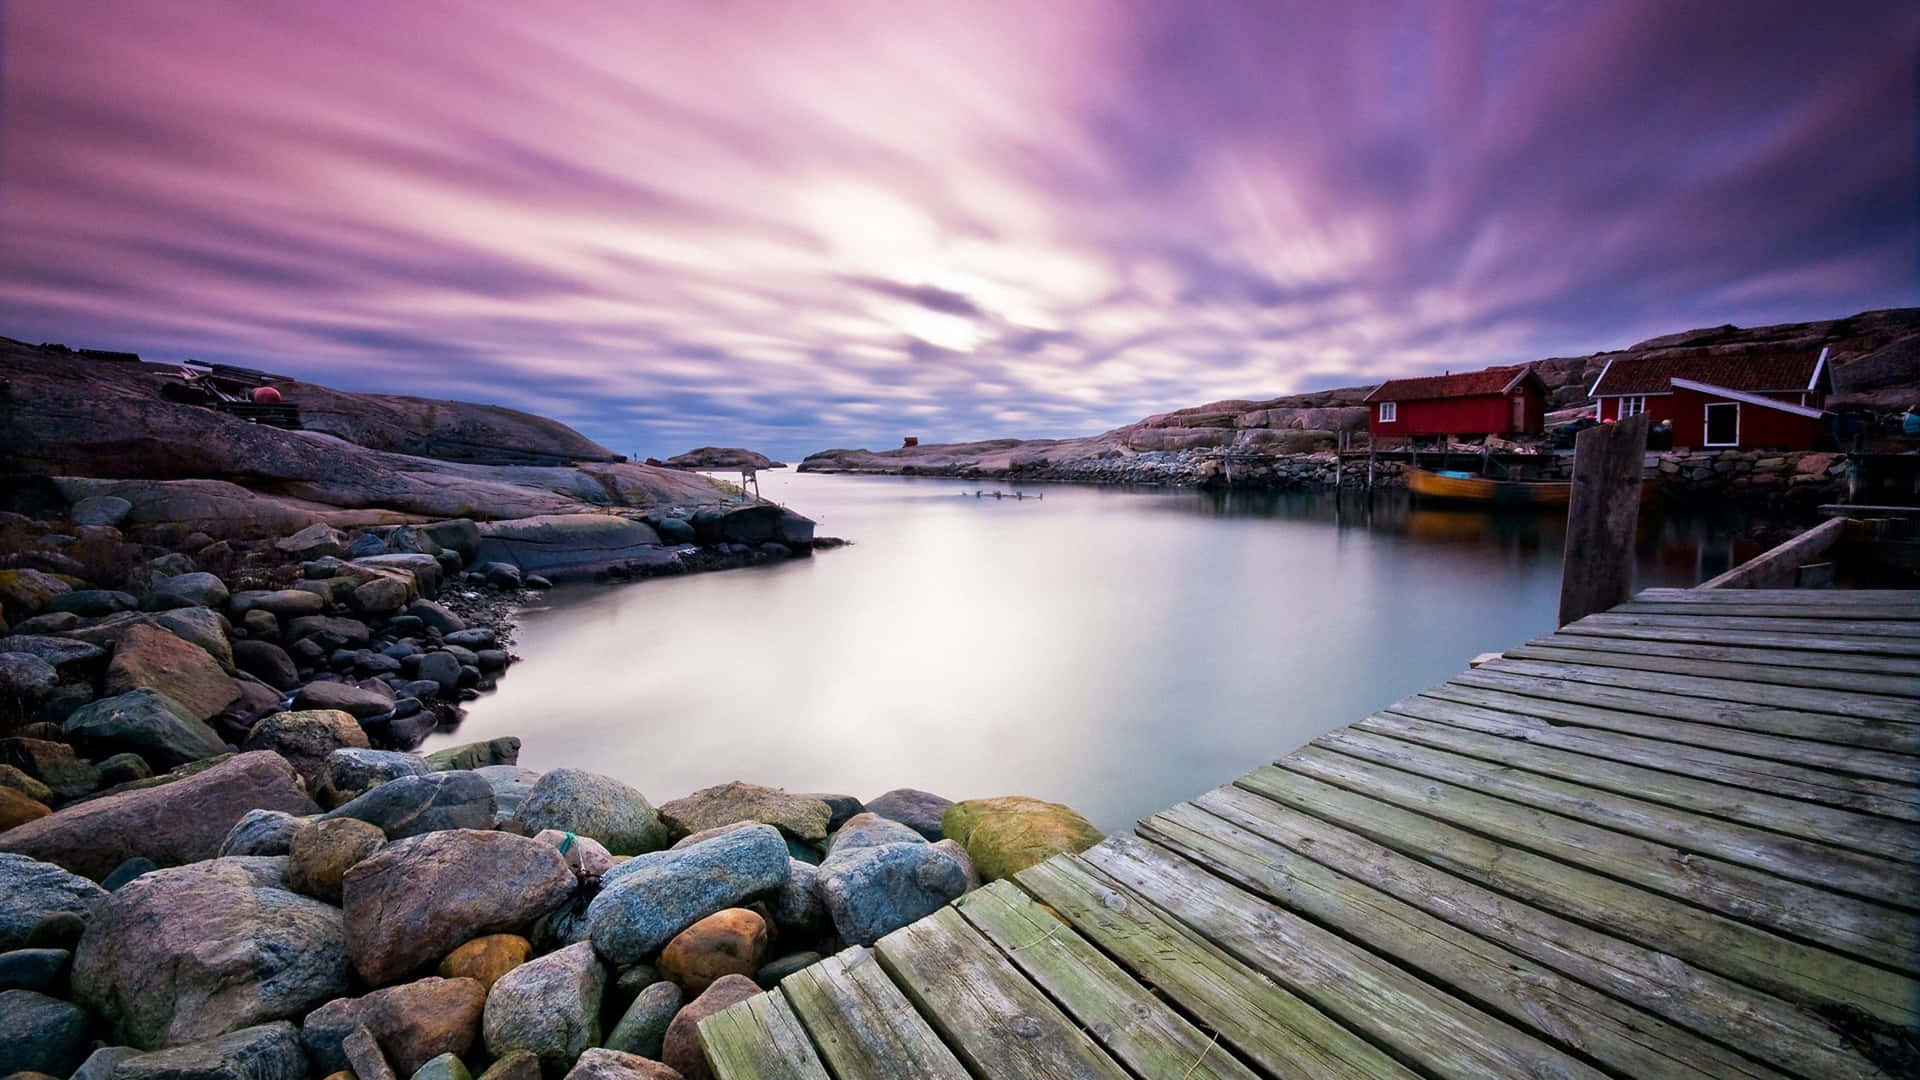 A Wooden Dock With A Purple Sky And A Boat